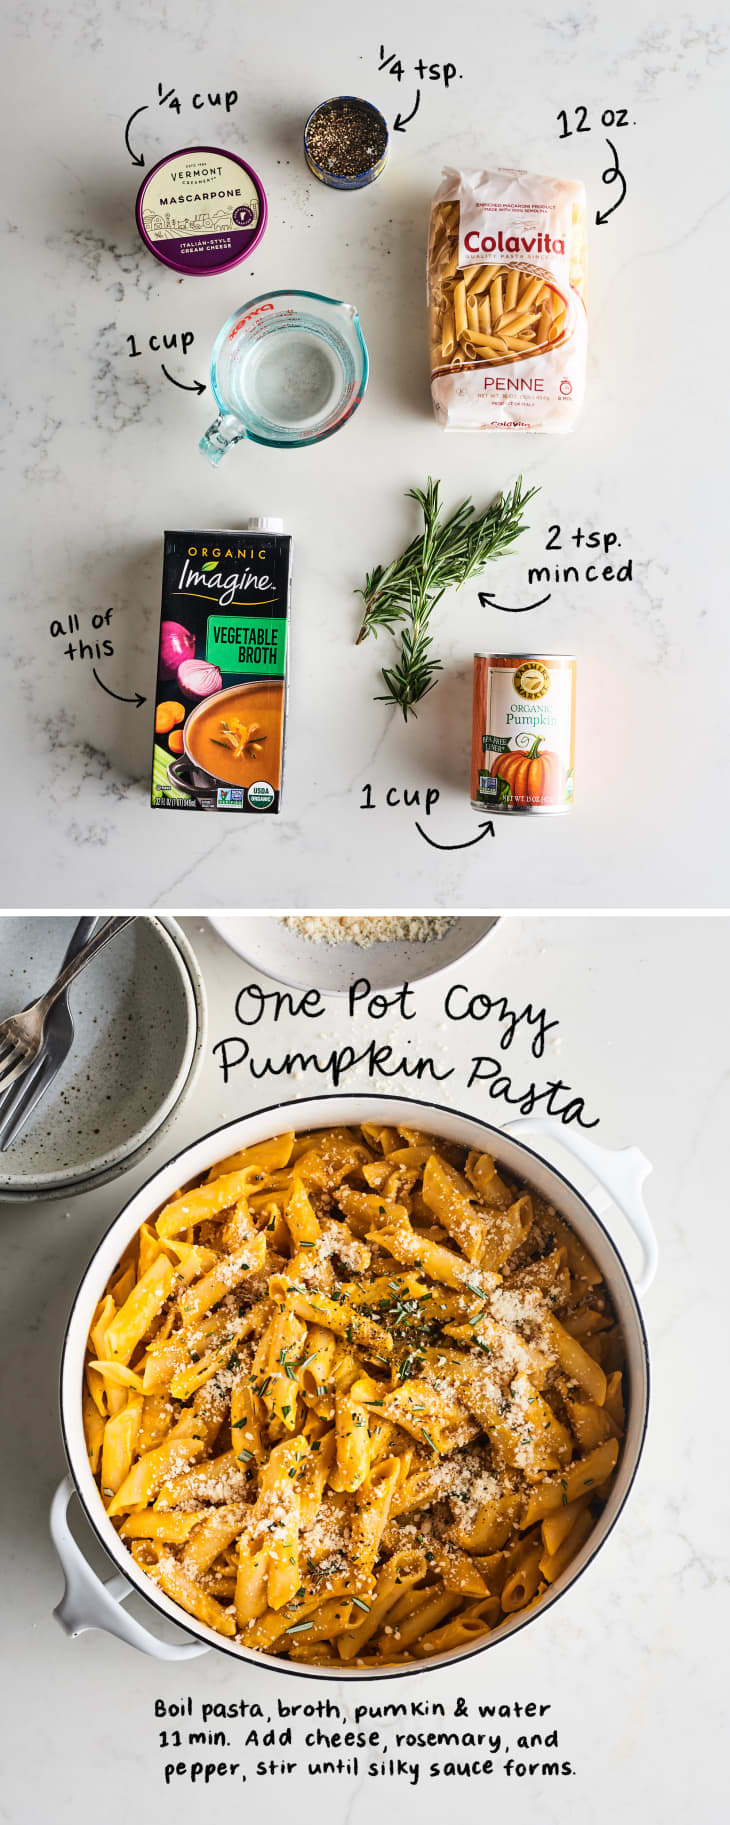 5 Easy, Comforting One-Pot Pastas Made with Broth | The Kitchn